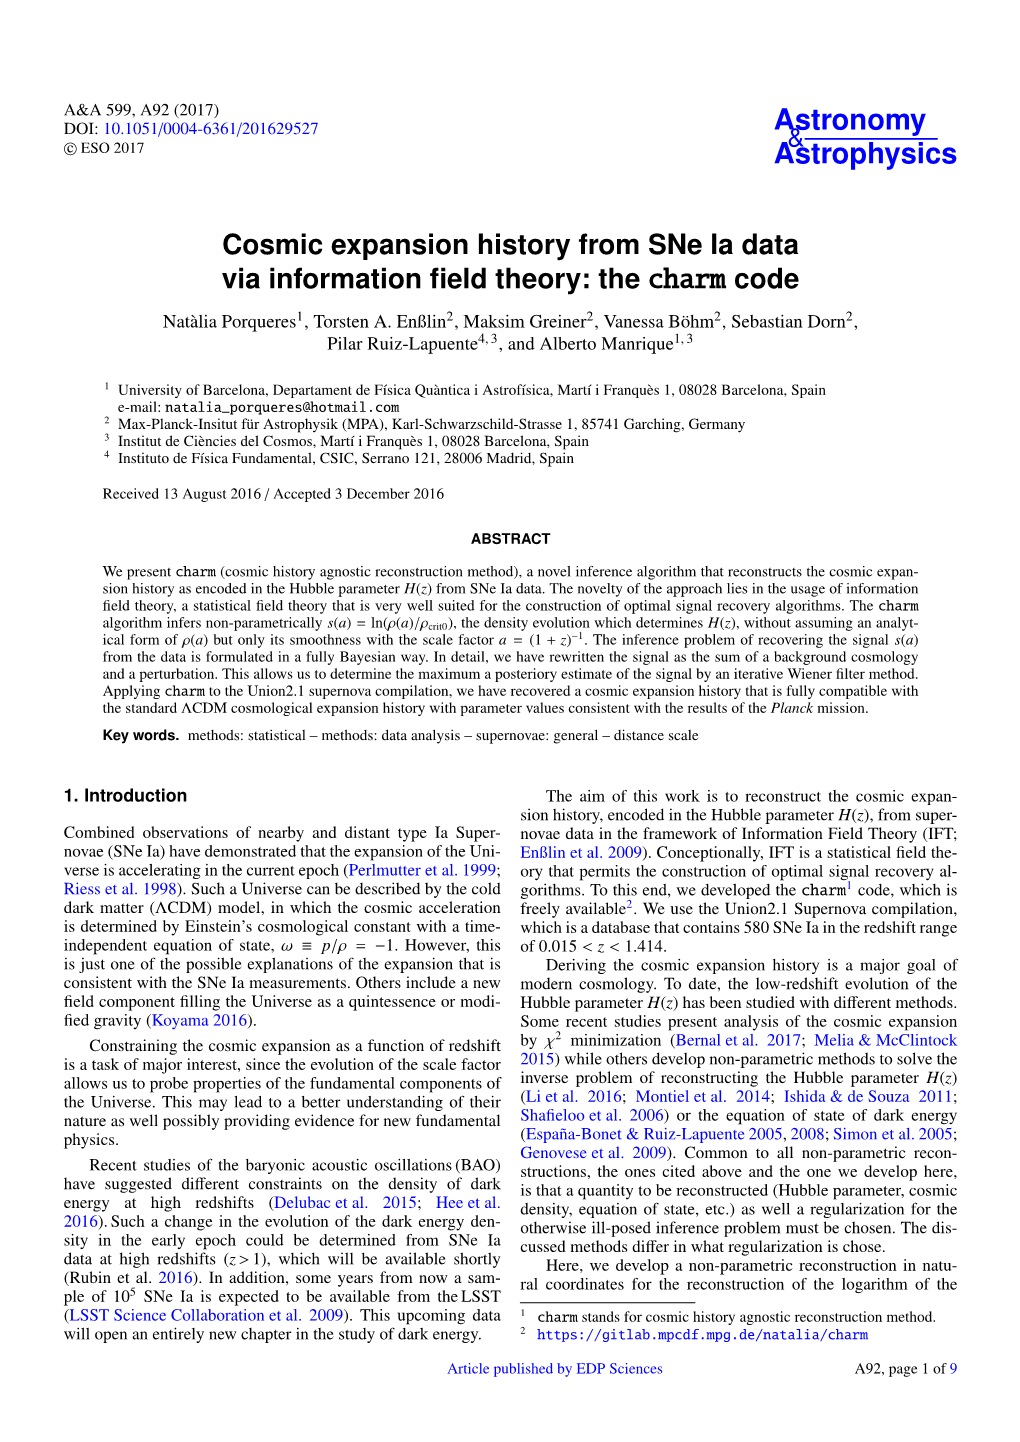 Cosmic Expansion History from Sne Ia Data Via Information Field Theory: the Charm Code